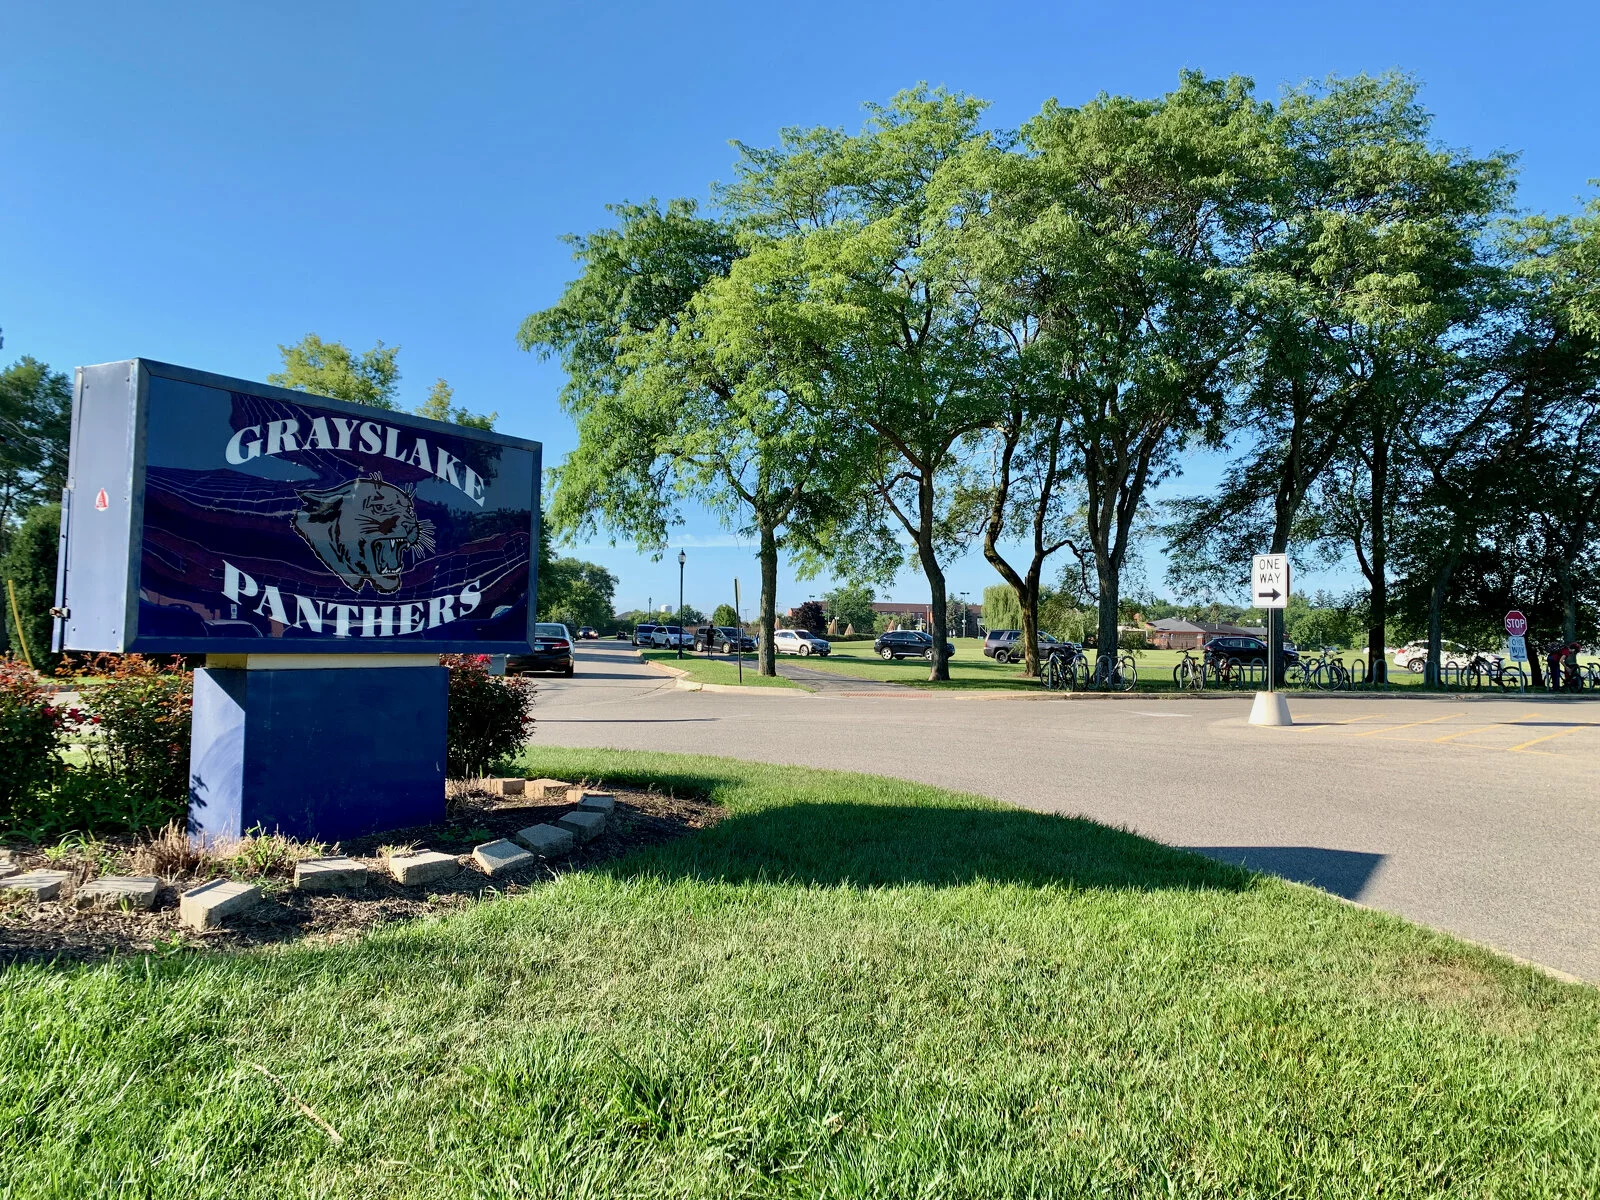 Marquee sign in front of Grayslake Middle School